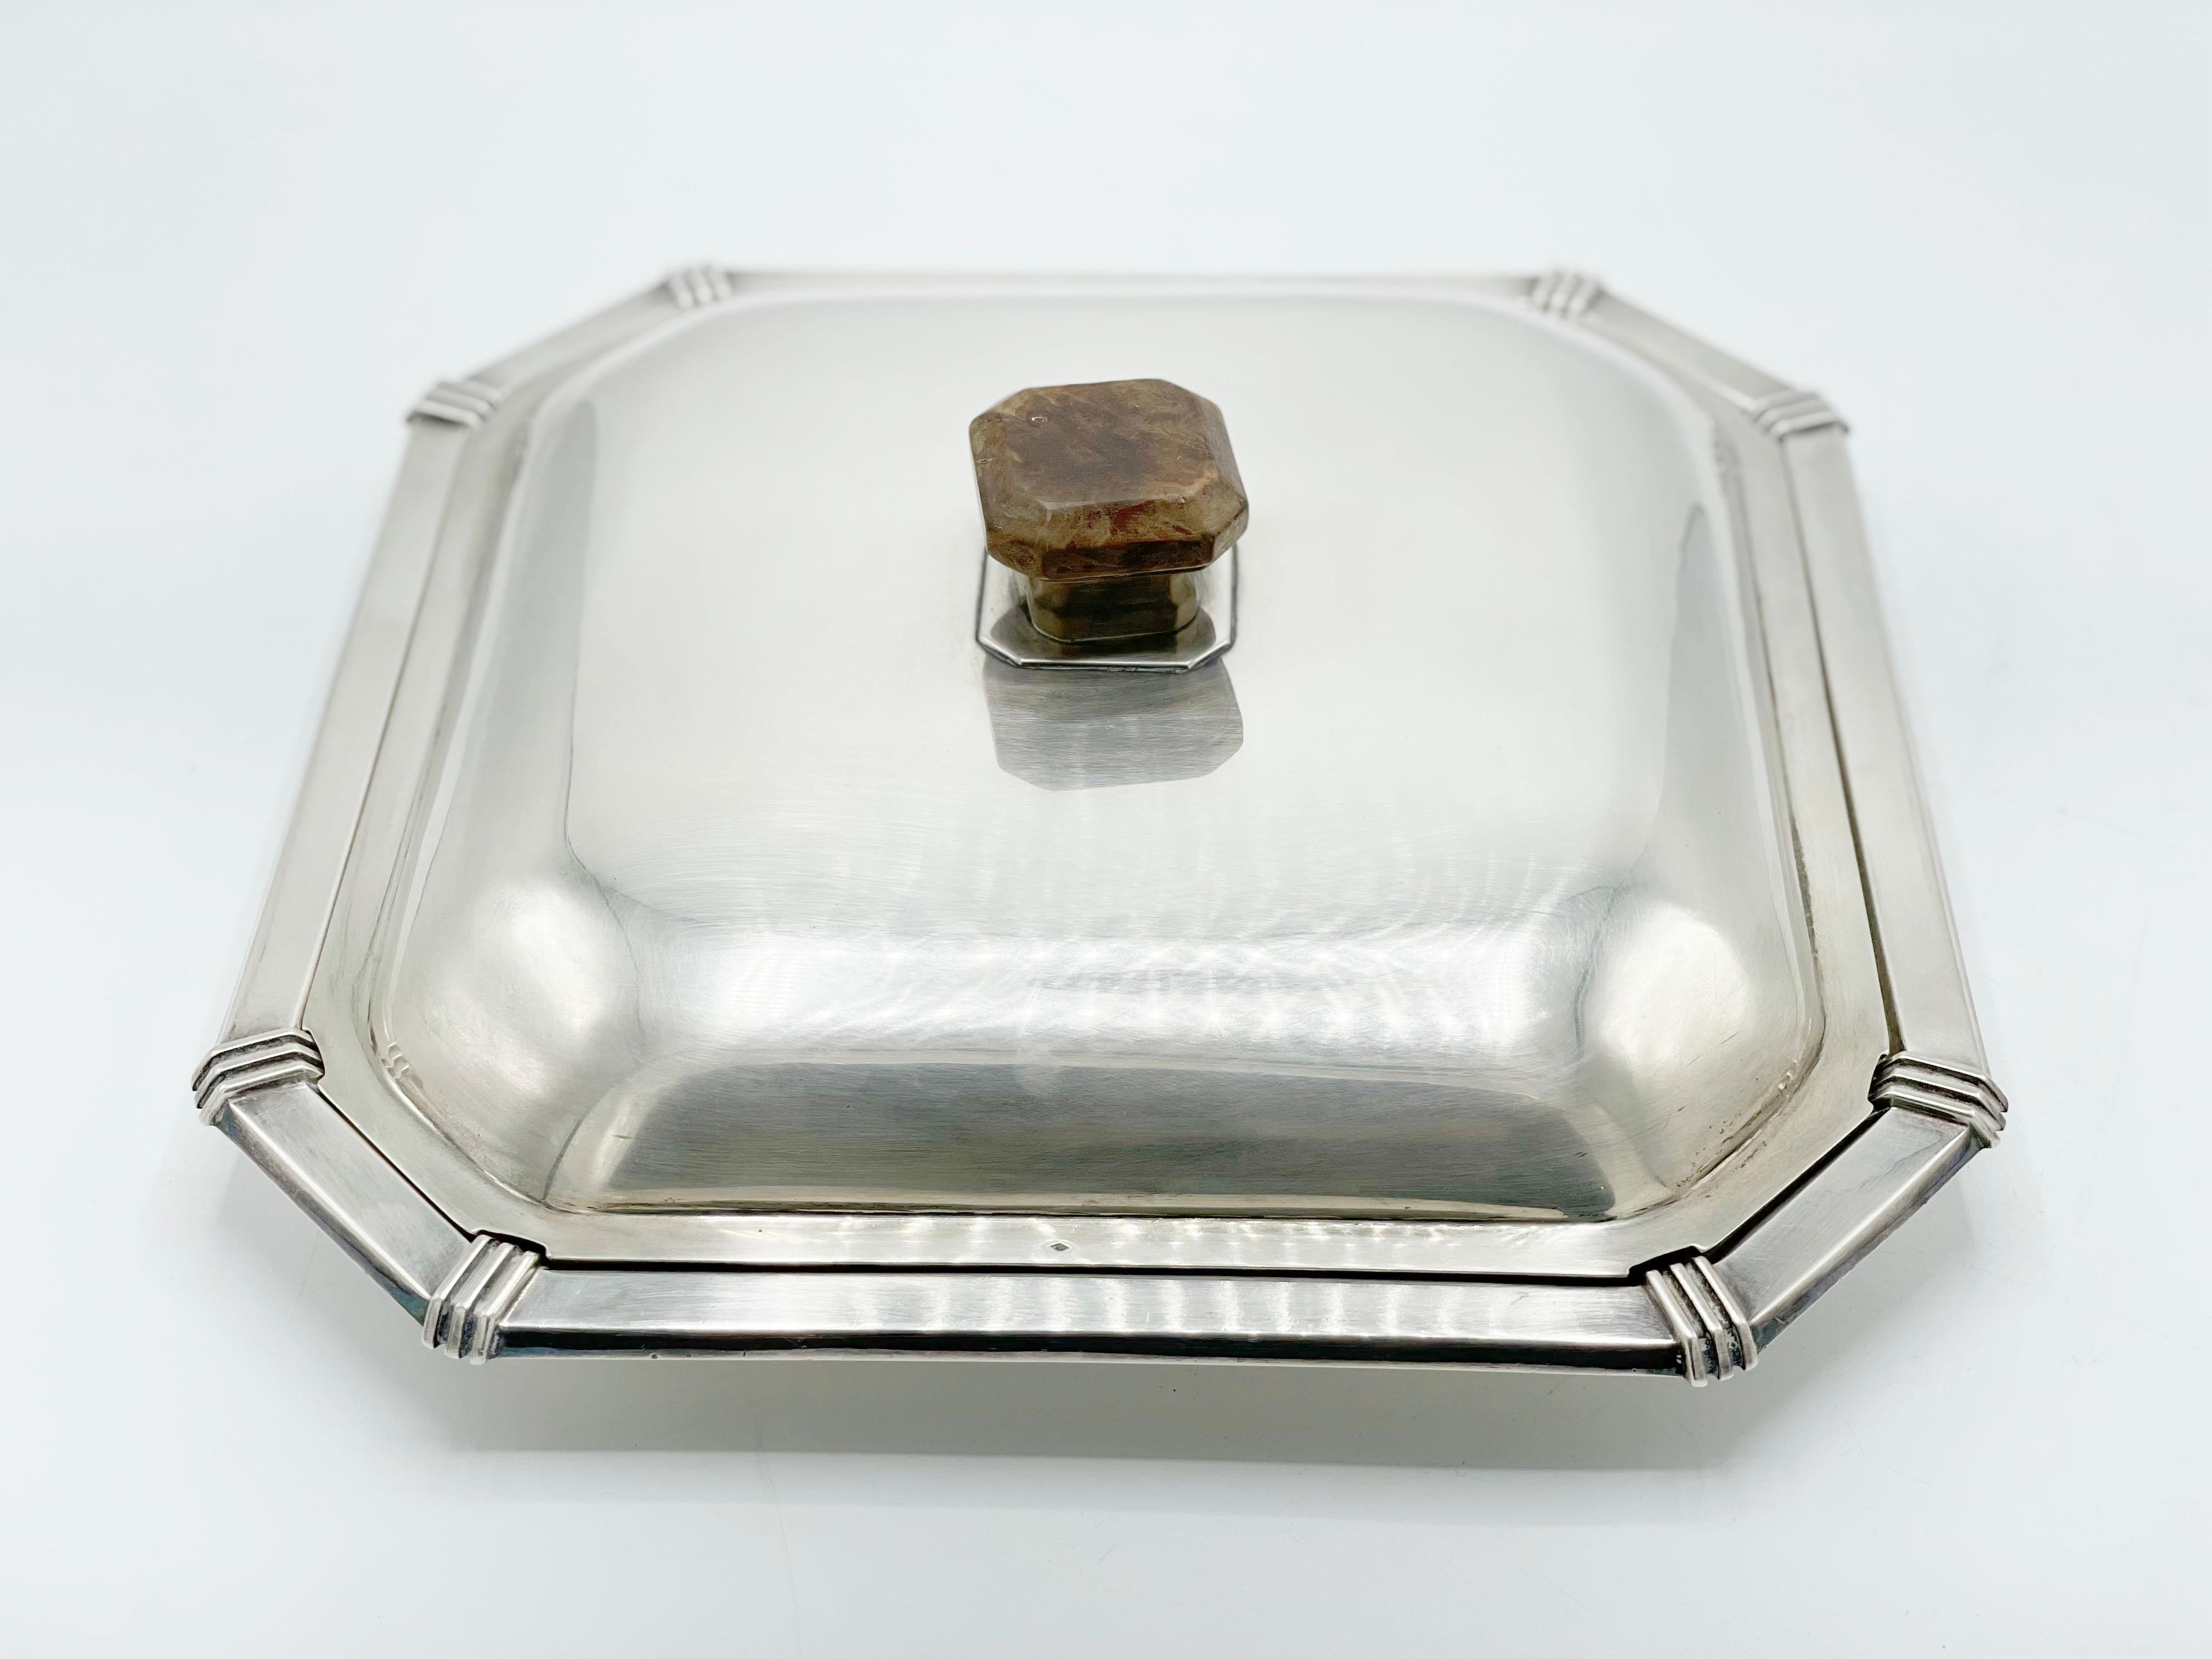 Amazing and rare Jean-Émile PUIFORCAT (1897-1945) Art Deco Entree dish in silver, hollow rectangular body decorated with geometric crosses in the corners - Signature of a stamp 